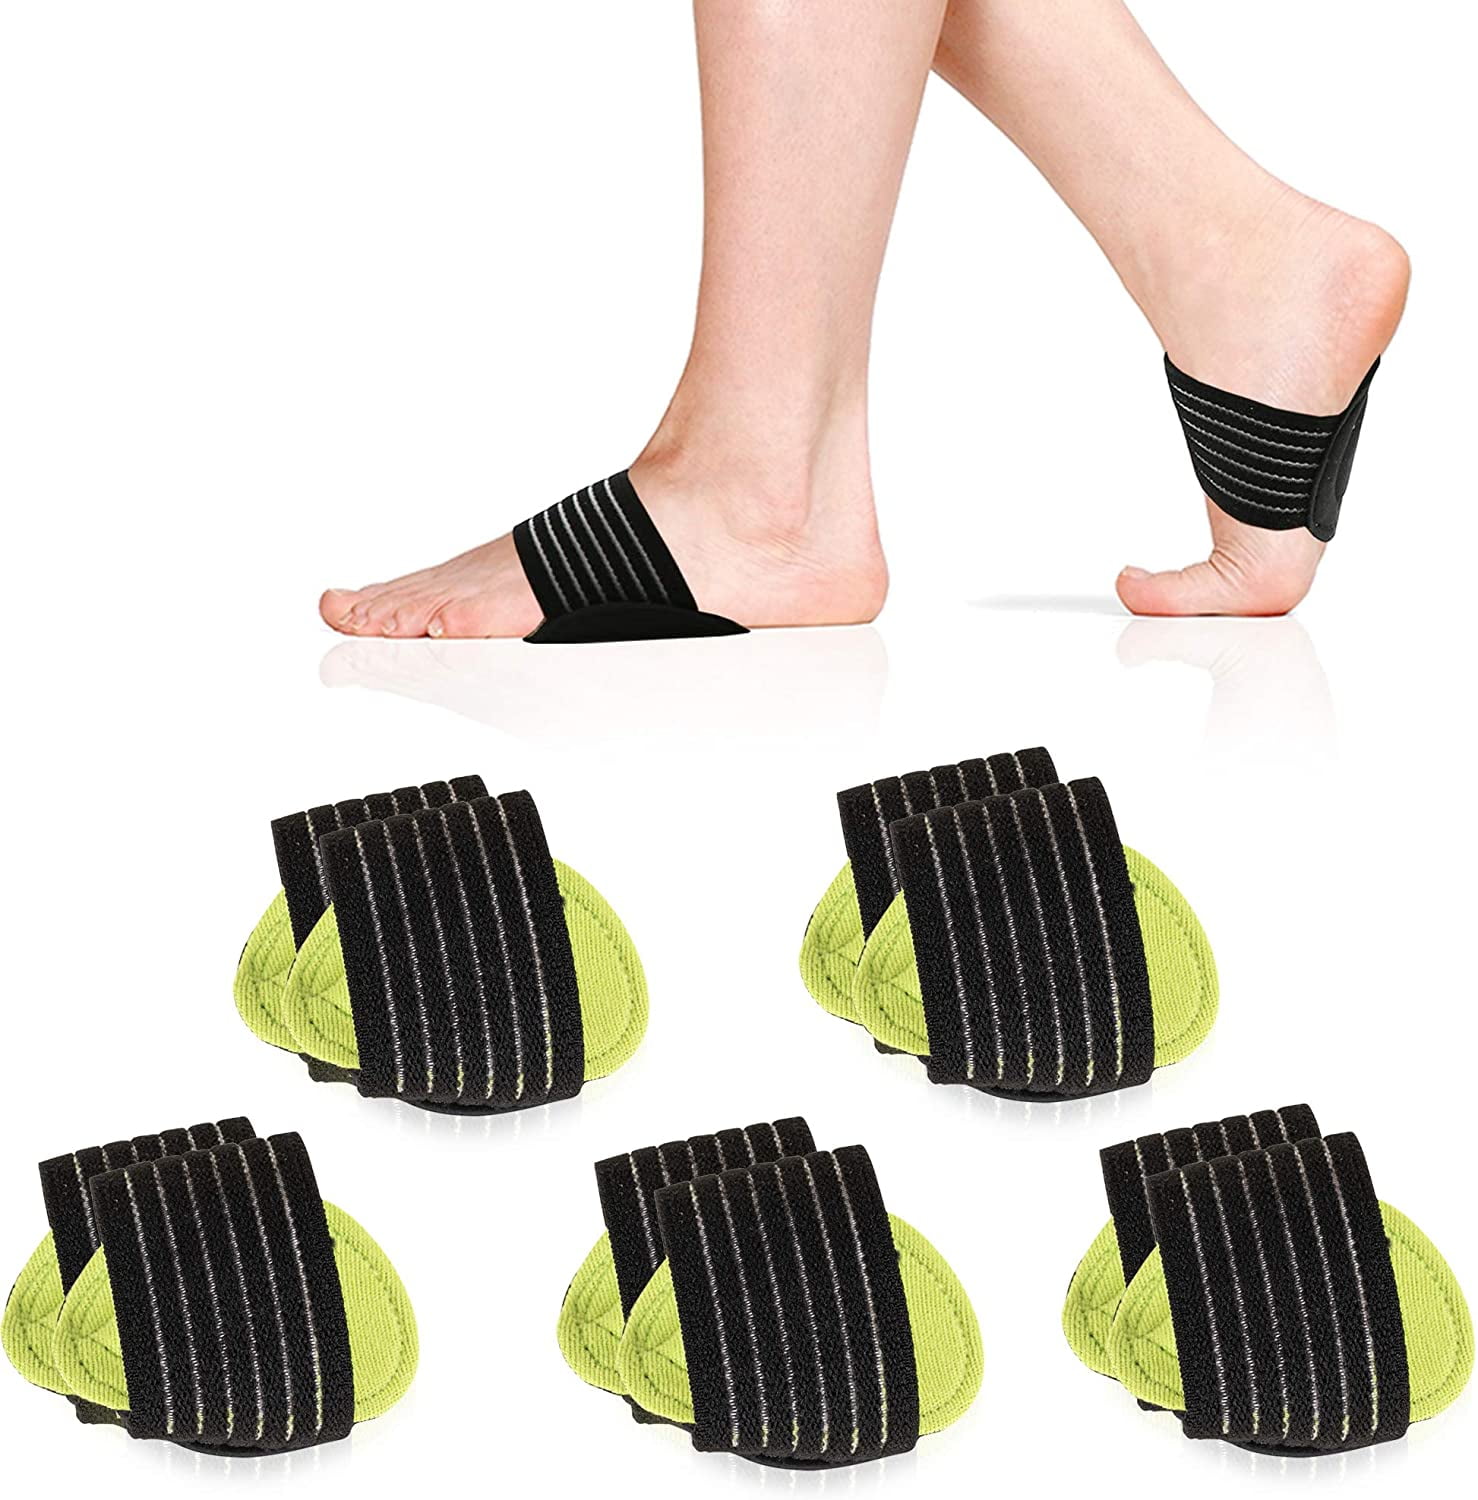 Buy M : BraceAbility Elastic Ankle Brace & Foot Arch Support Sleeve - For  Gymnastics, Dance, Ballet, Cheerleading, Tumbling, Yoga, Pilates, Exercise  - Protect & Prevent Ankle Sprain, Twisting & Swelling -